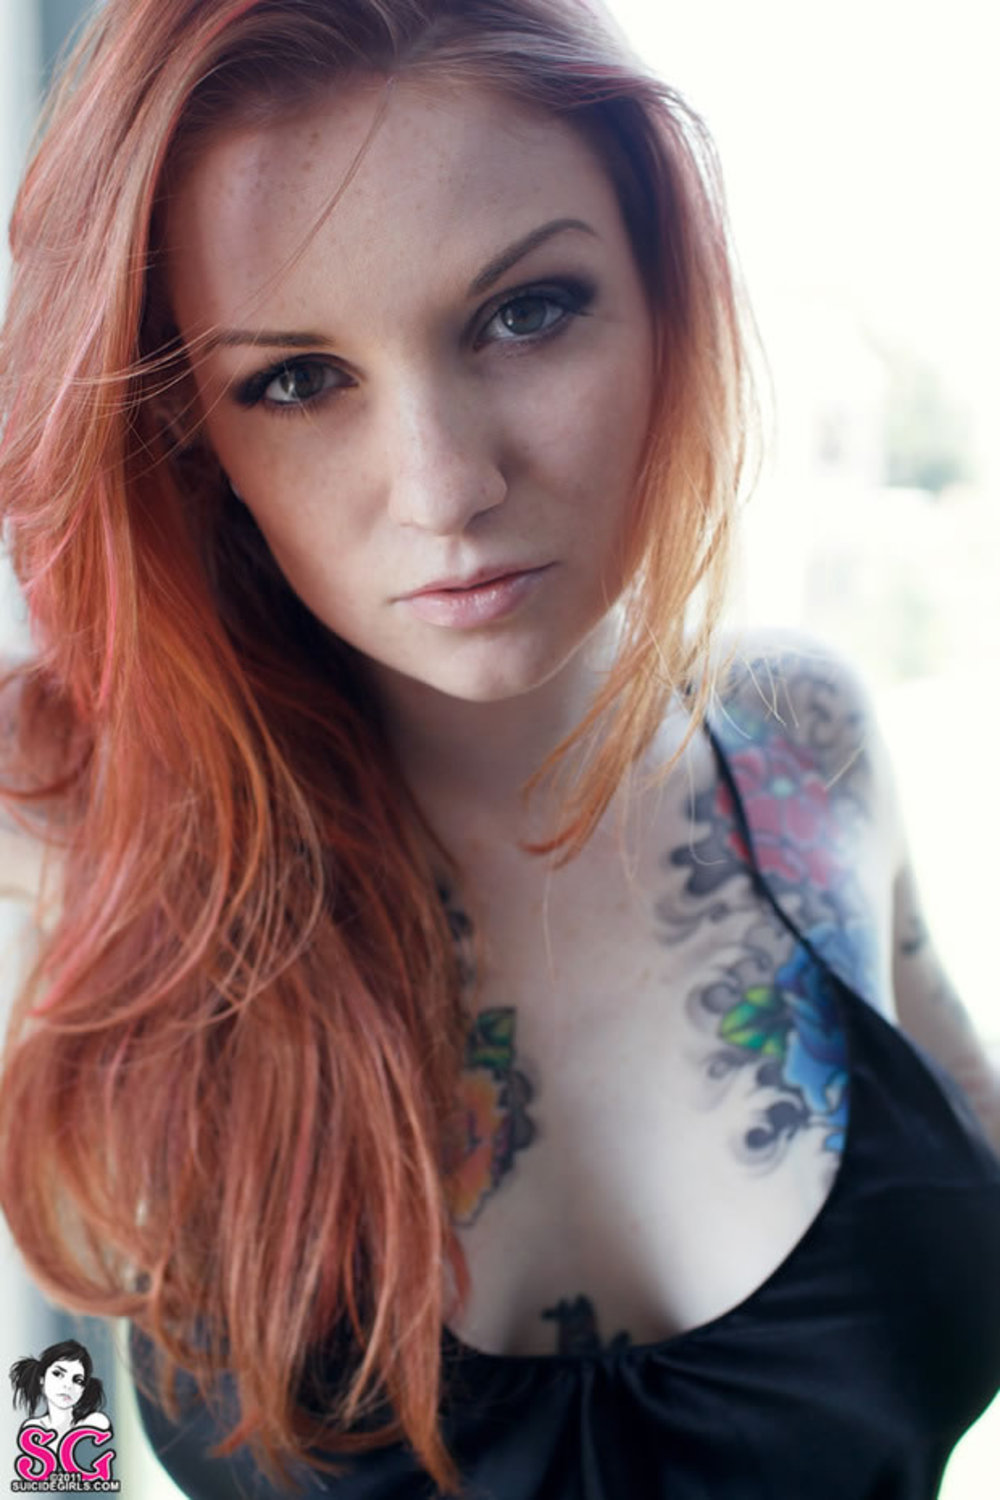 The Hottest Redhead 01